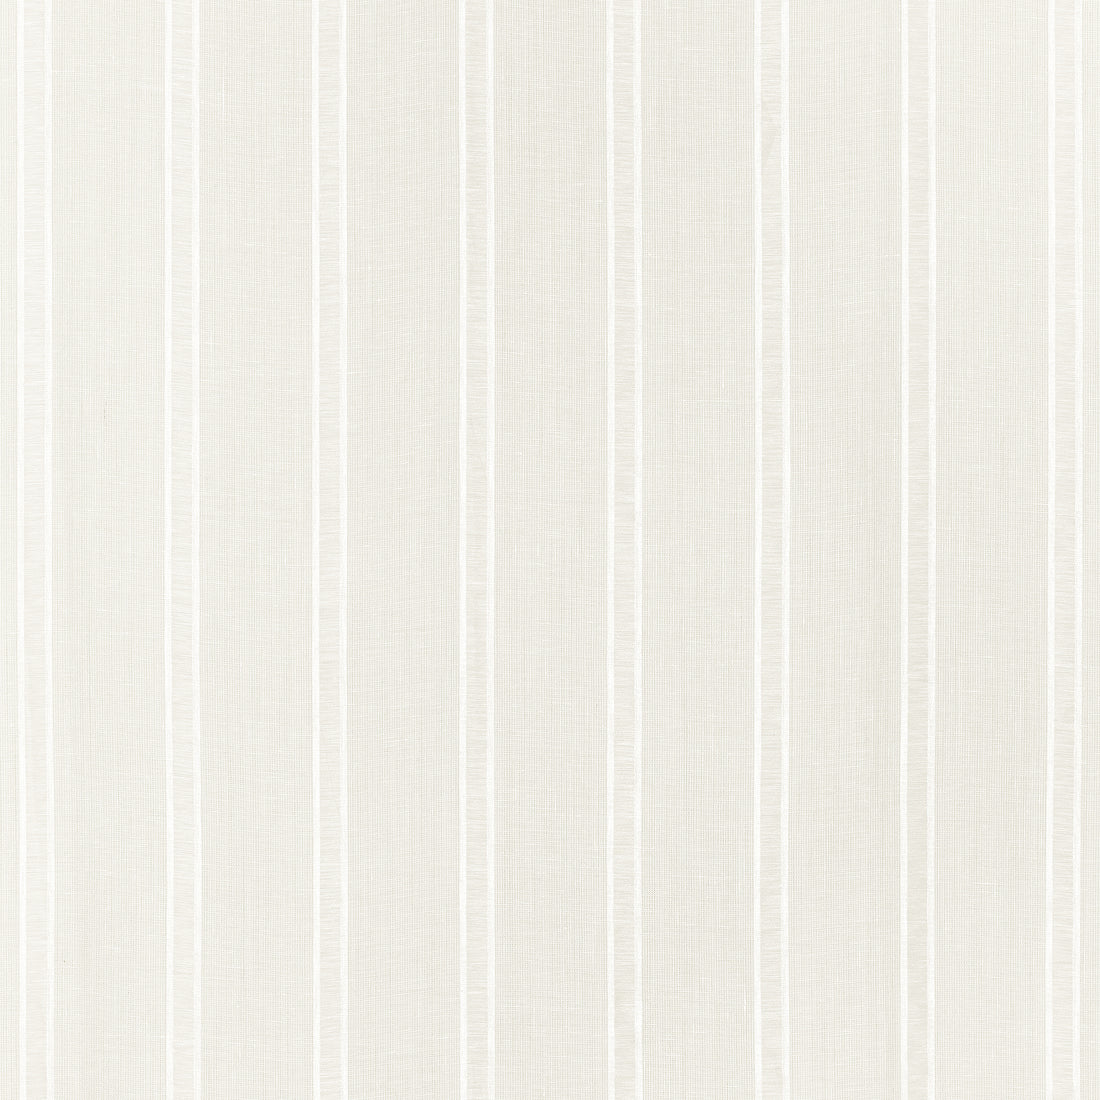 Carlisle Stripe fabric in linen color - pattern number FWW7117 - by Thibaut in the Atmosphere collection